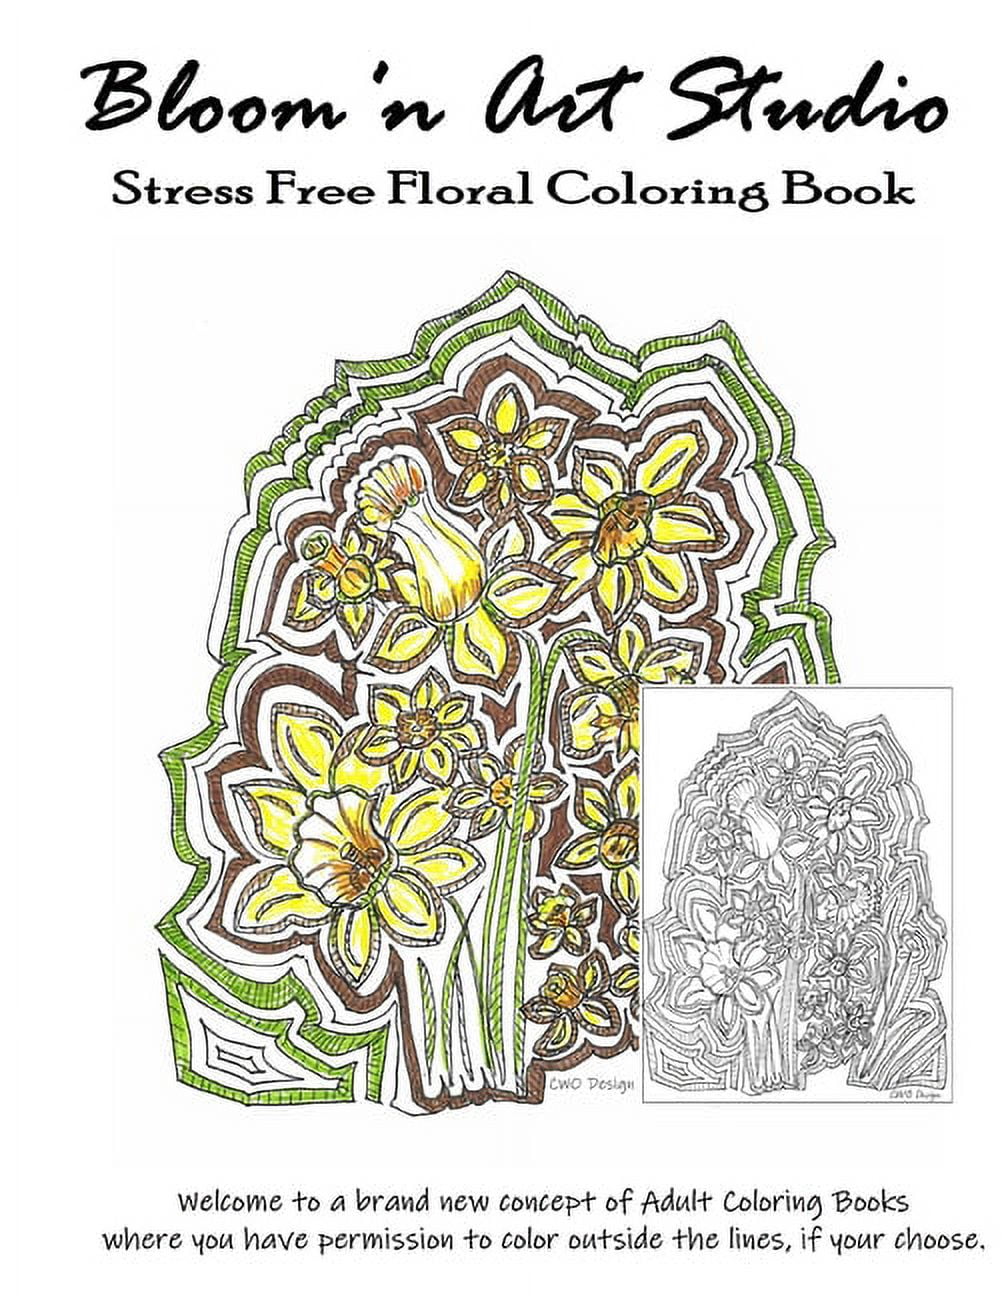 Bloom'n Art Studio Stress Free Coloring Book: Welcome to a Brand New Concept of Adult Coloring Books, You Have Permission to Color Outside the Linesif You Choose. [Book]